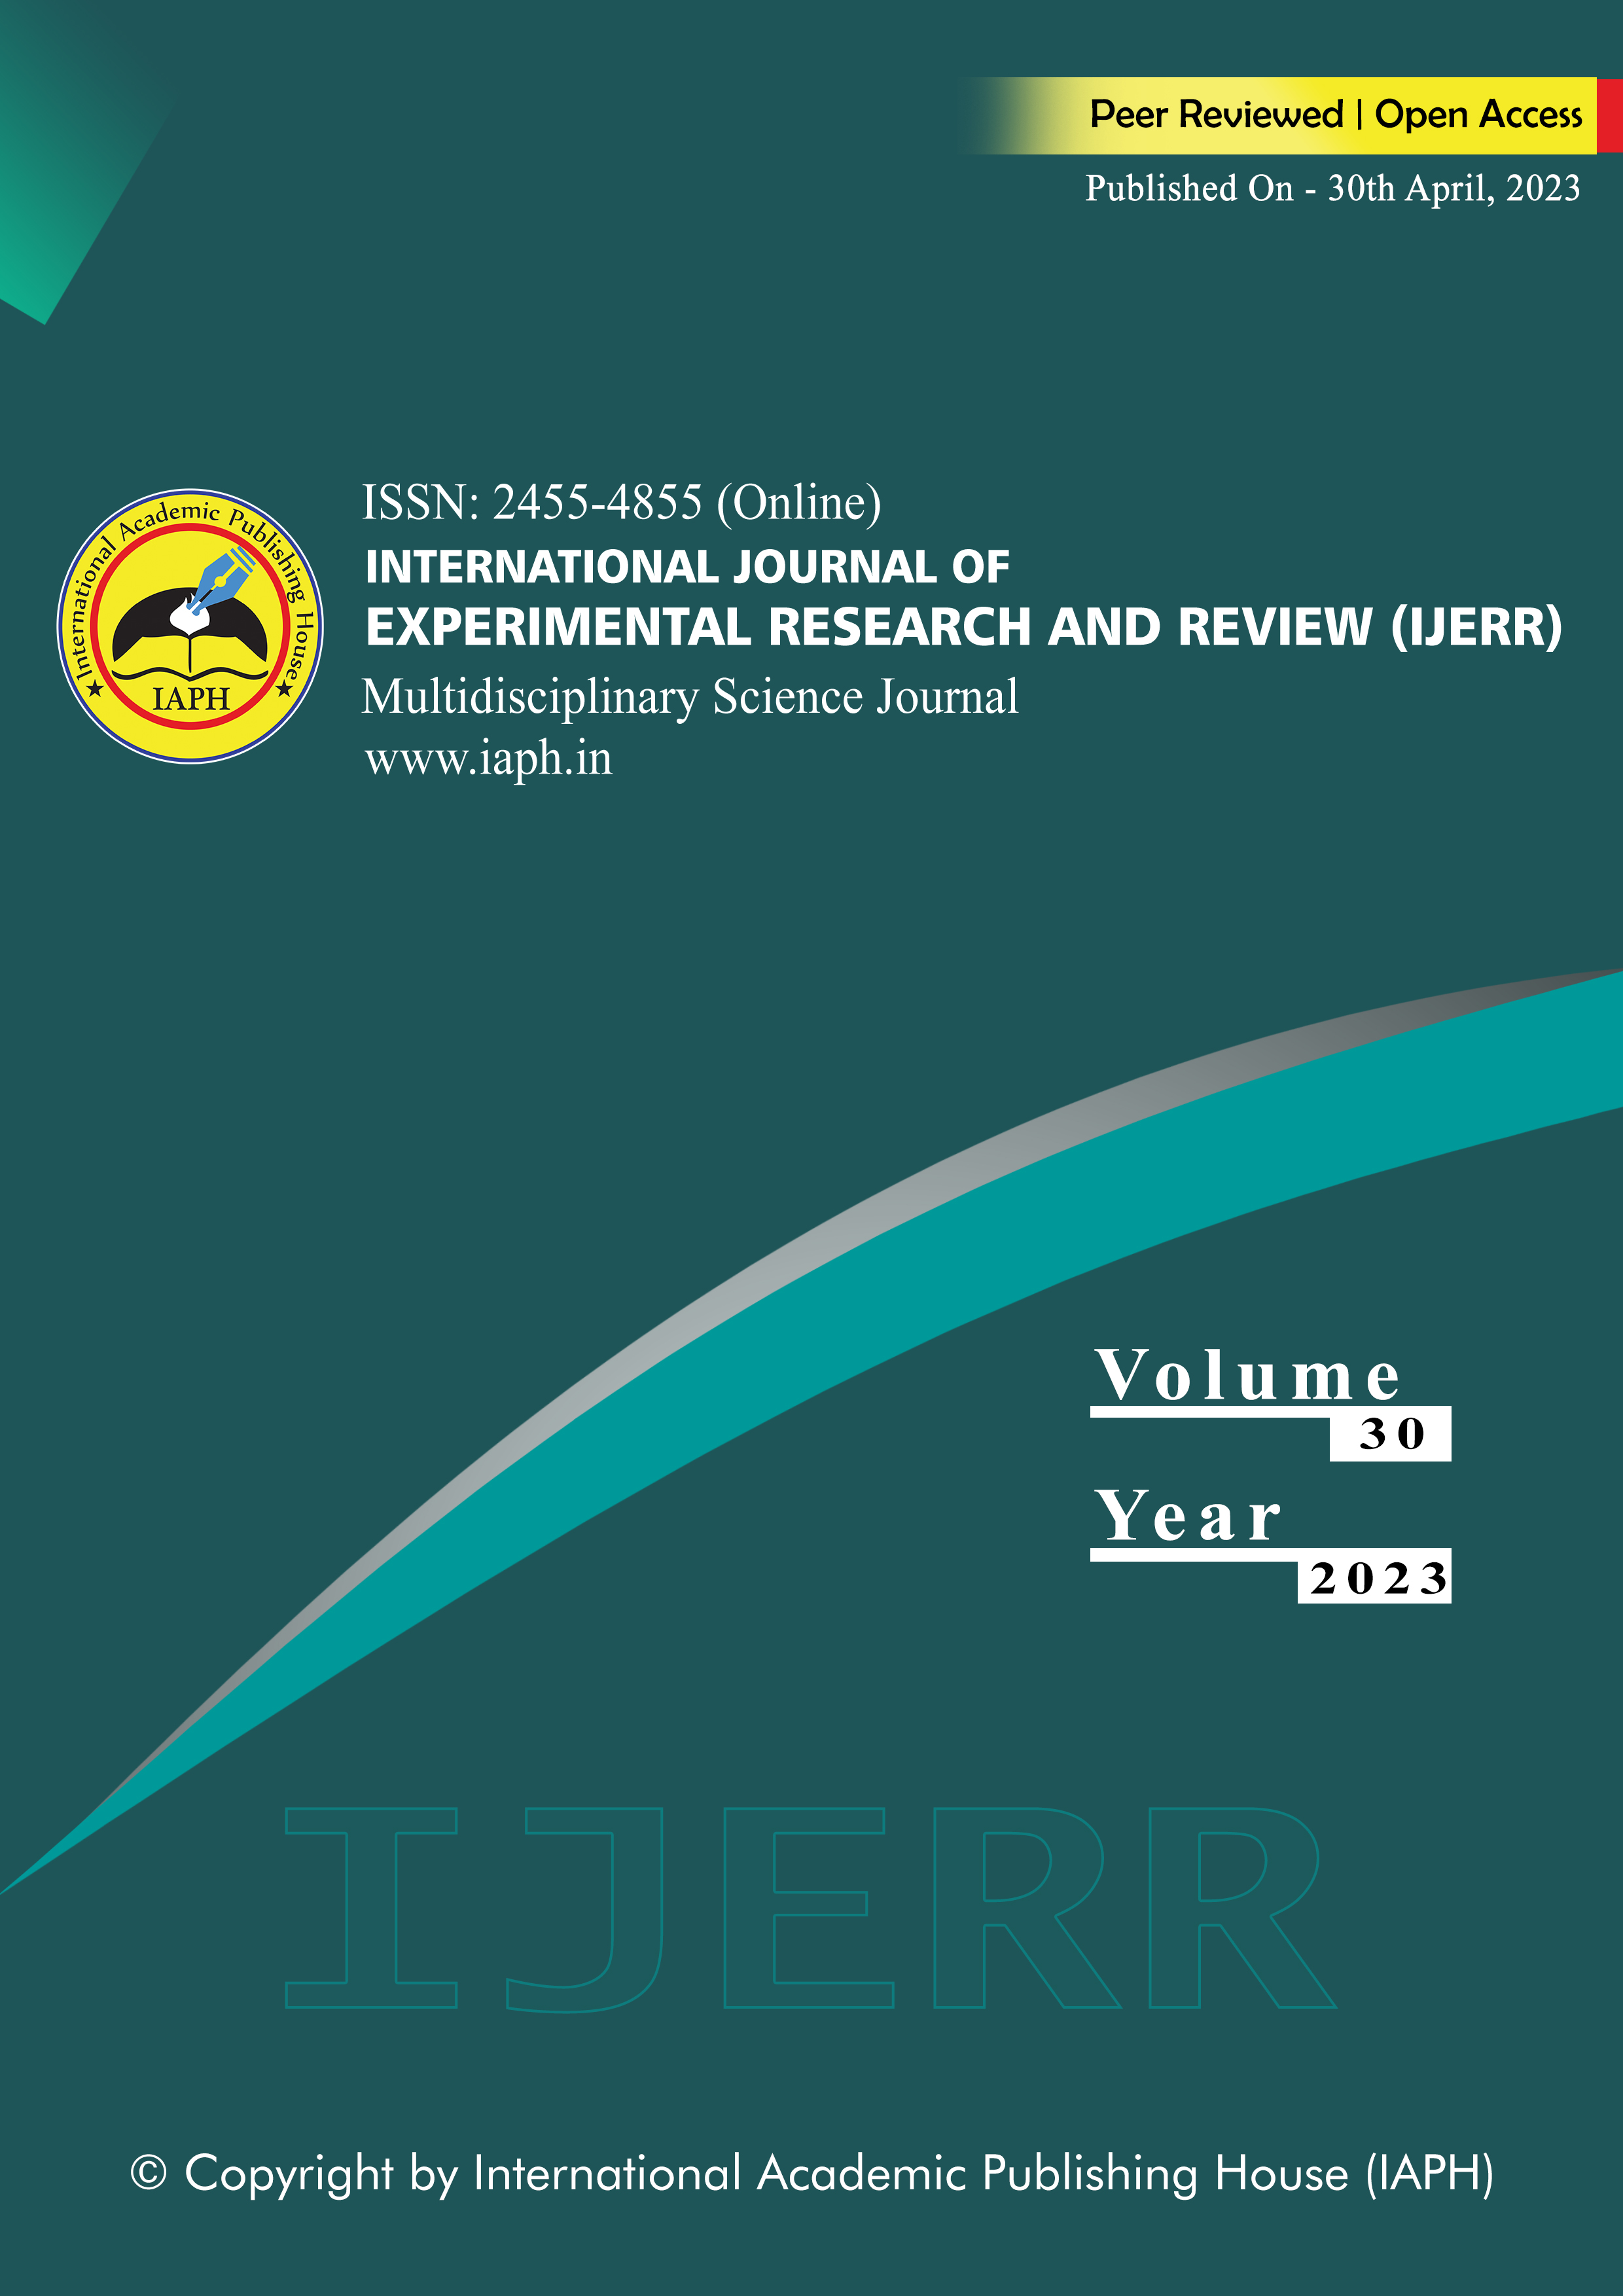 International Journal of Experimental Research and Review, Volume 30, Year 2023. Published On 30th April, 2023